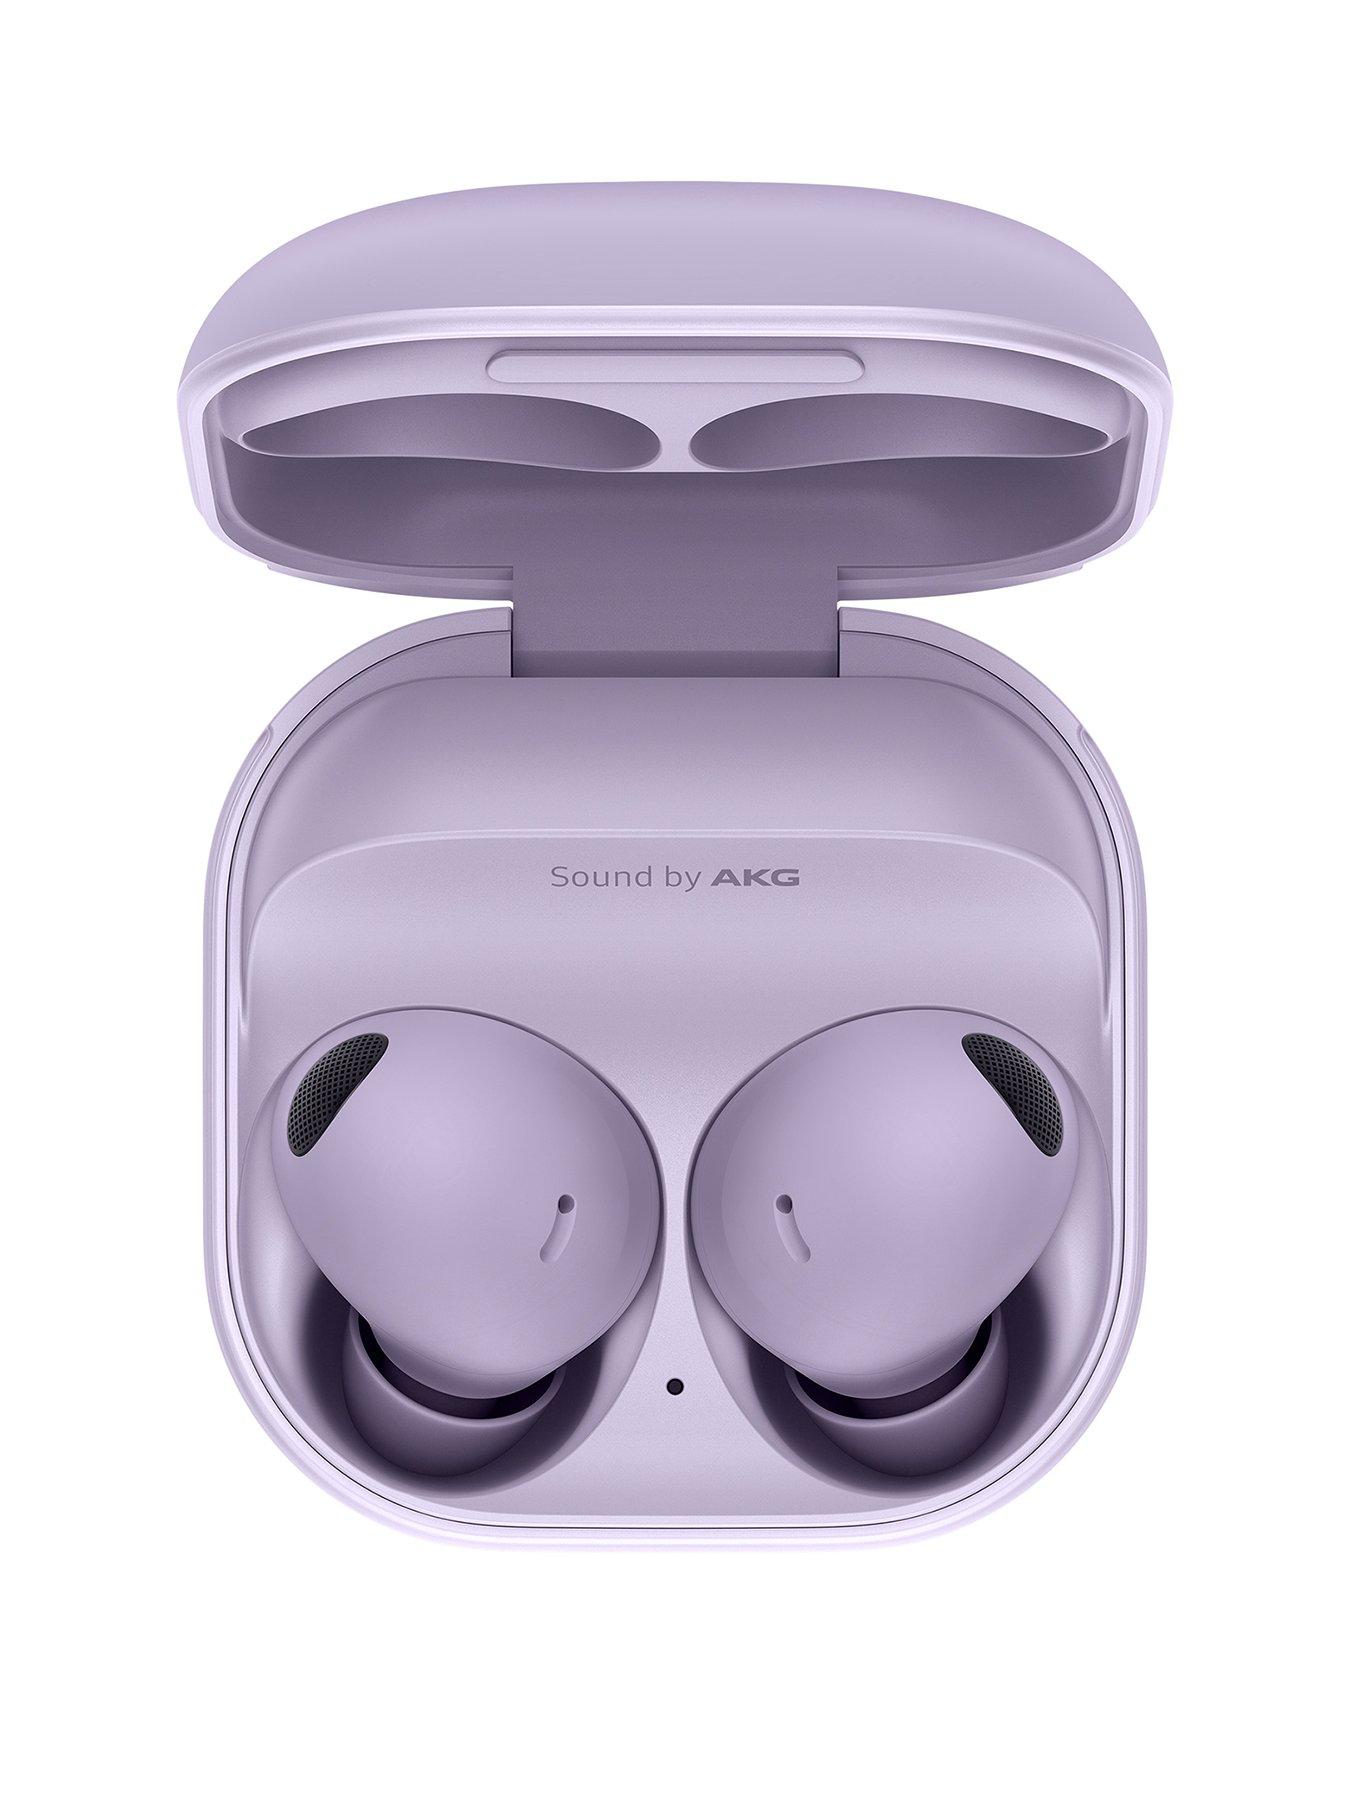 Insten Earcups Protector Case For Airpods Max Headphone, Soft Silicone Ear  Cups Cover Protection Accessories, Purple : Target